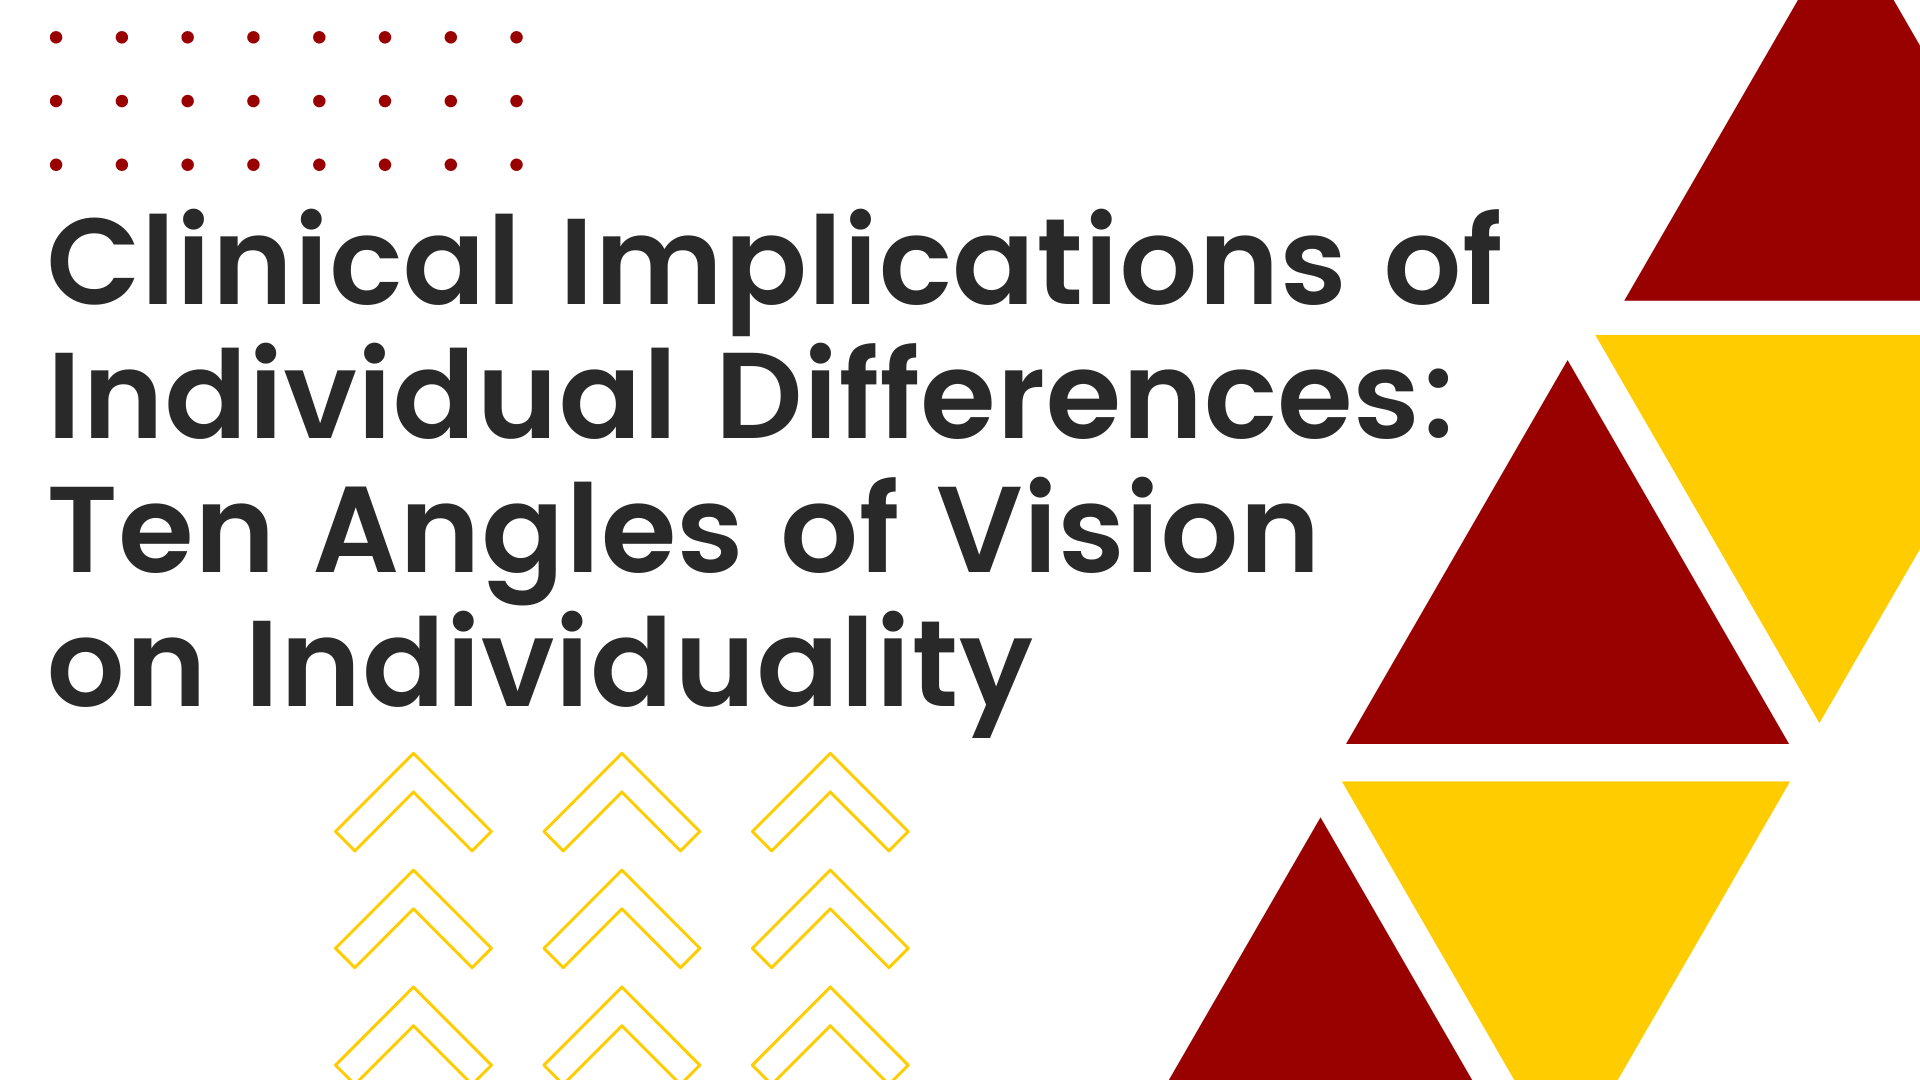 Clinical Implications of Individual Differences: Ten Angles of Vision on Individuality